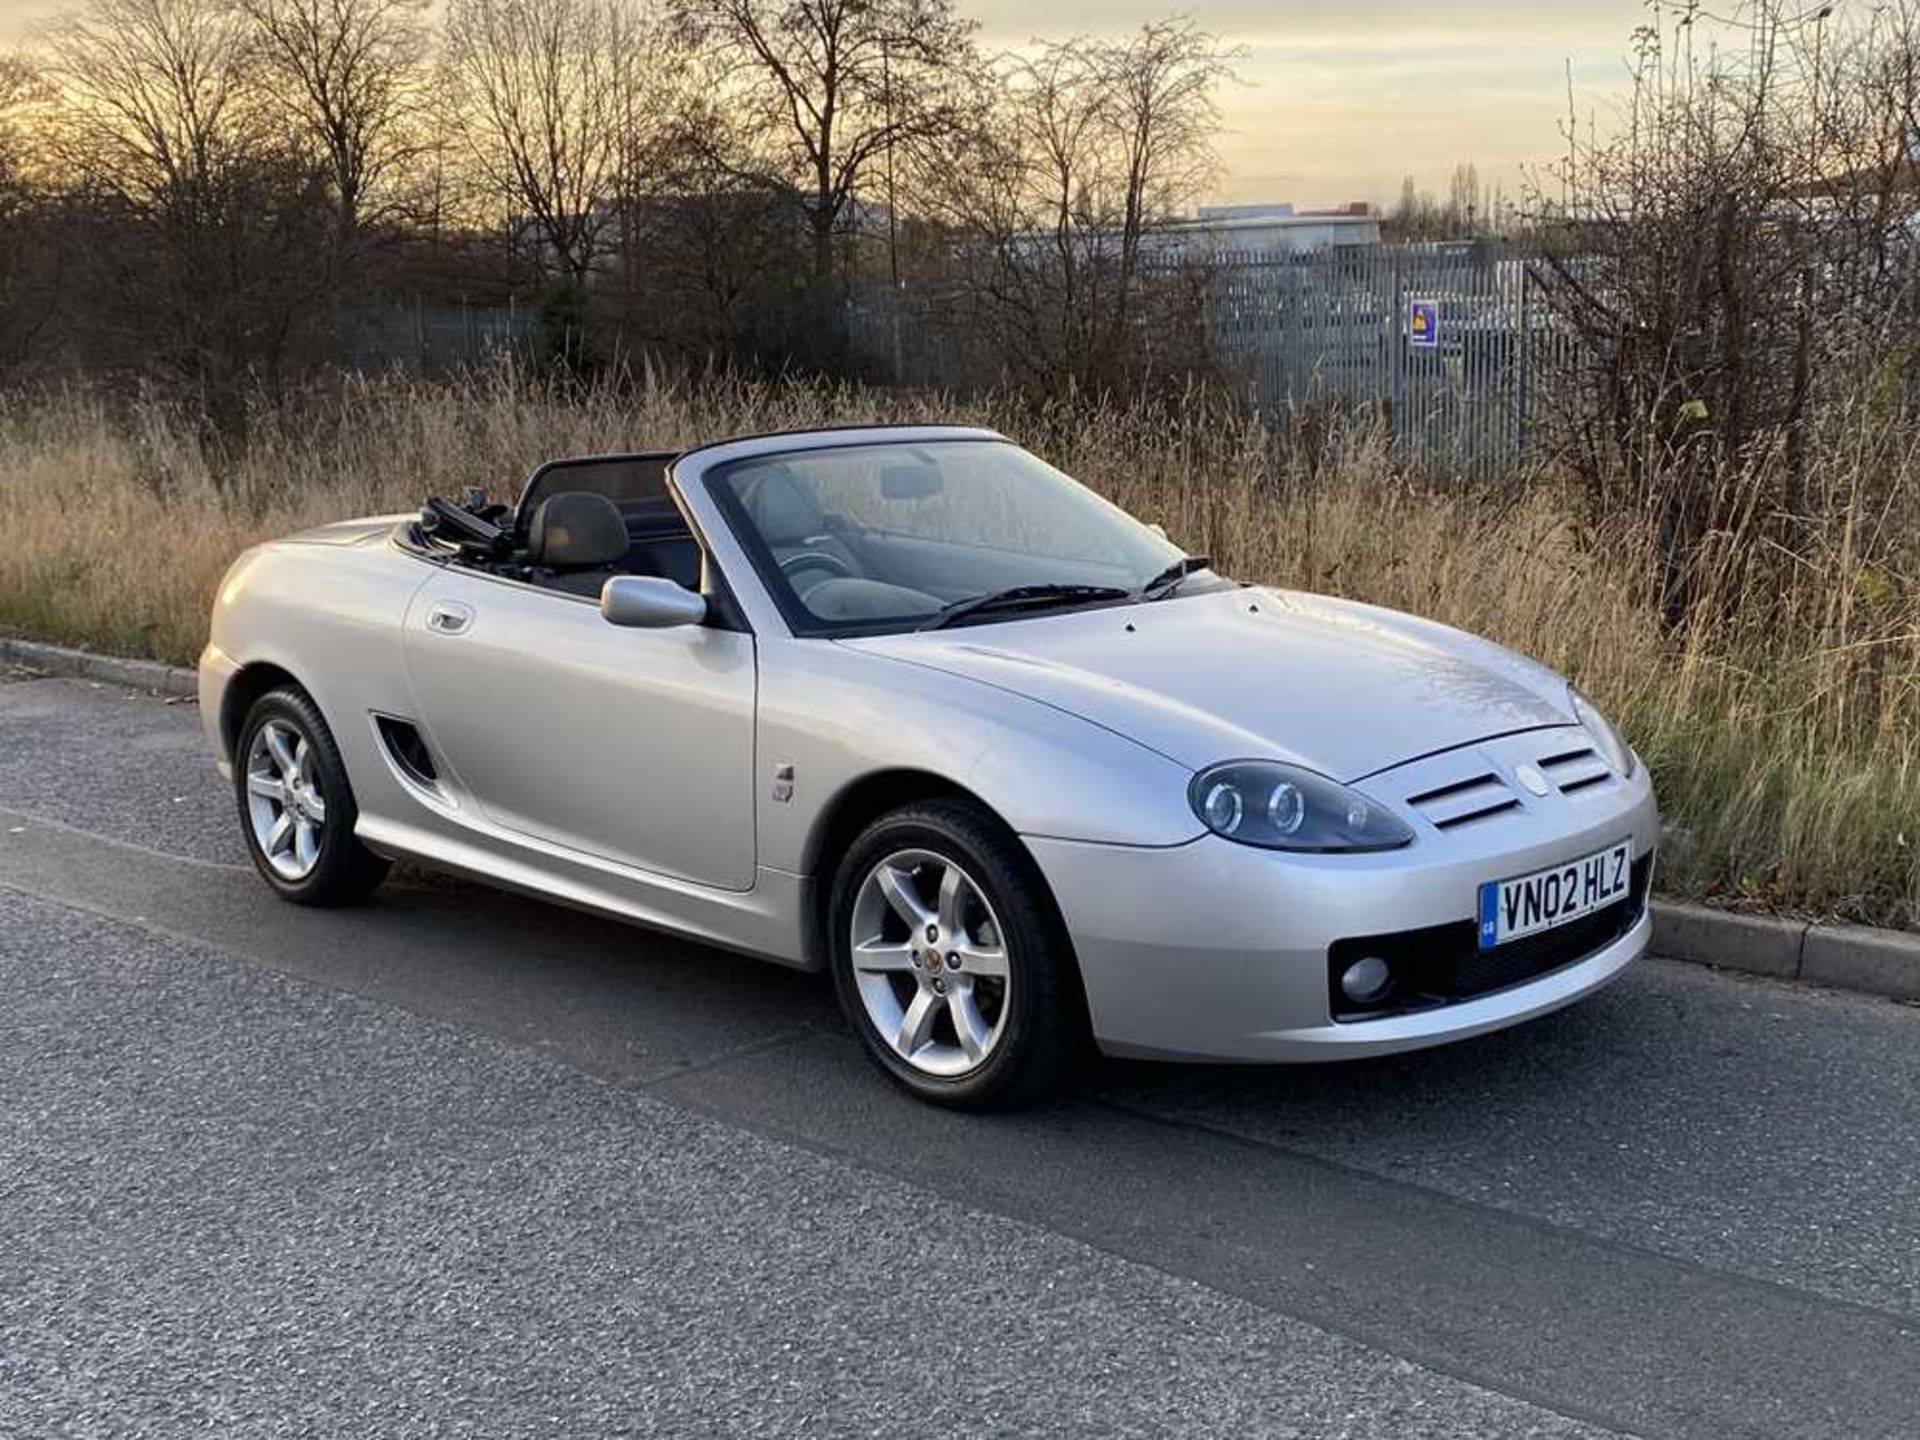 2002 MG TF 135 No Reserve - A low mileage example